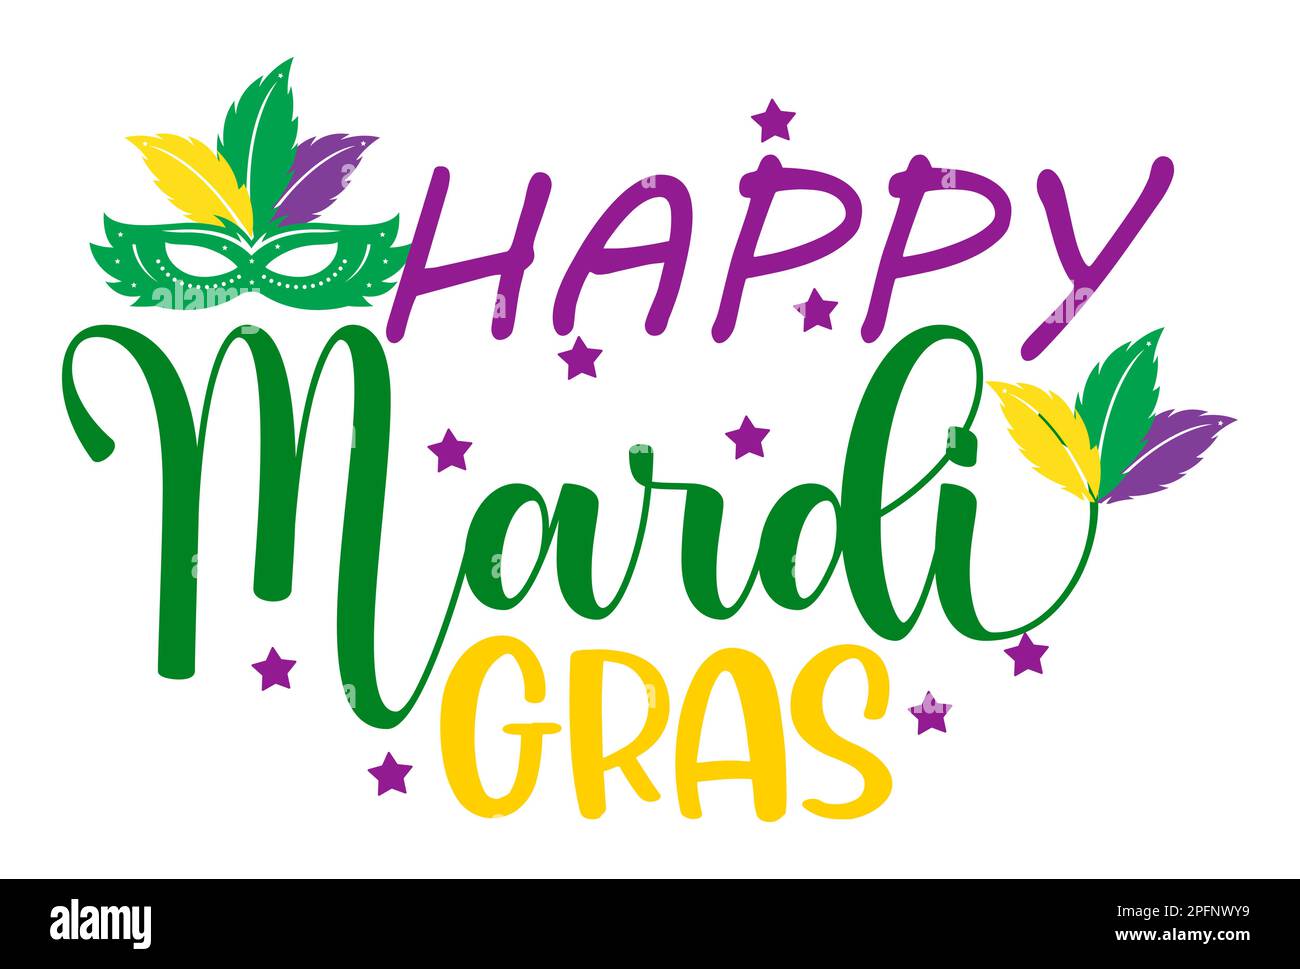 Happy Mardi Gras Colorful Lettering With Mask. Traditional Carnival In New Orleans, Louisiana. Vector illustration On White Background For poster, card Stock Vector